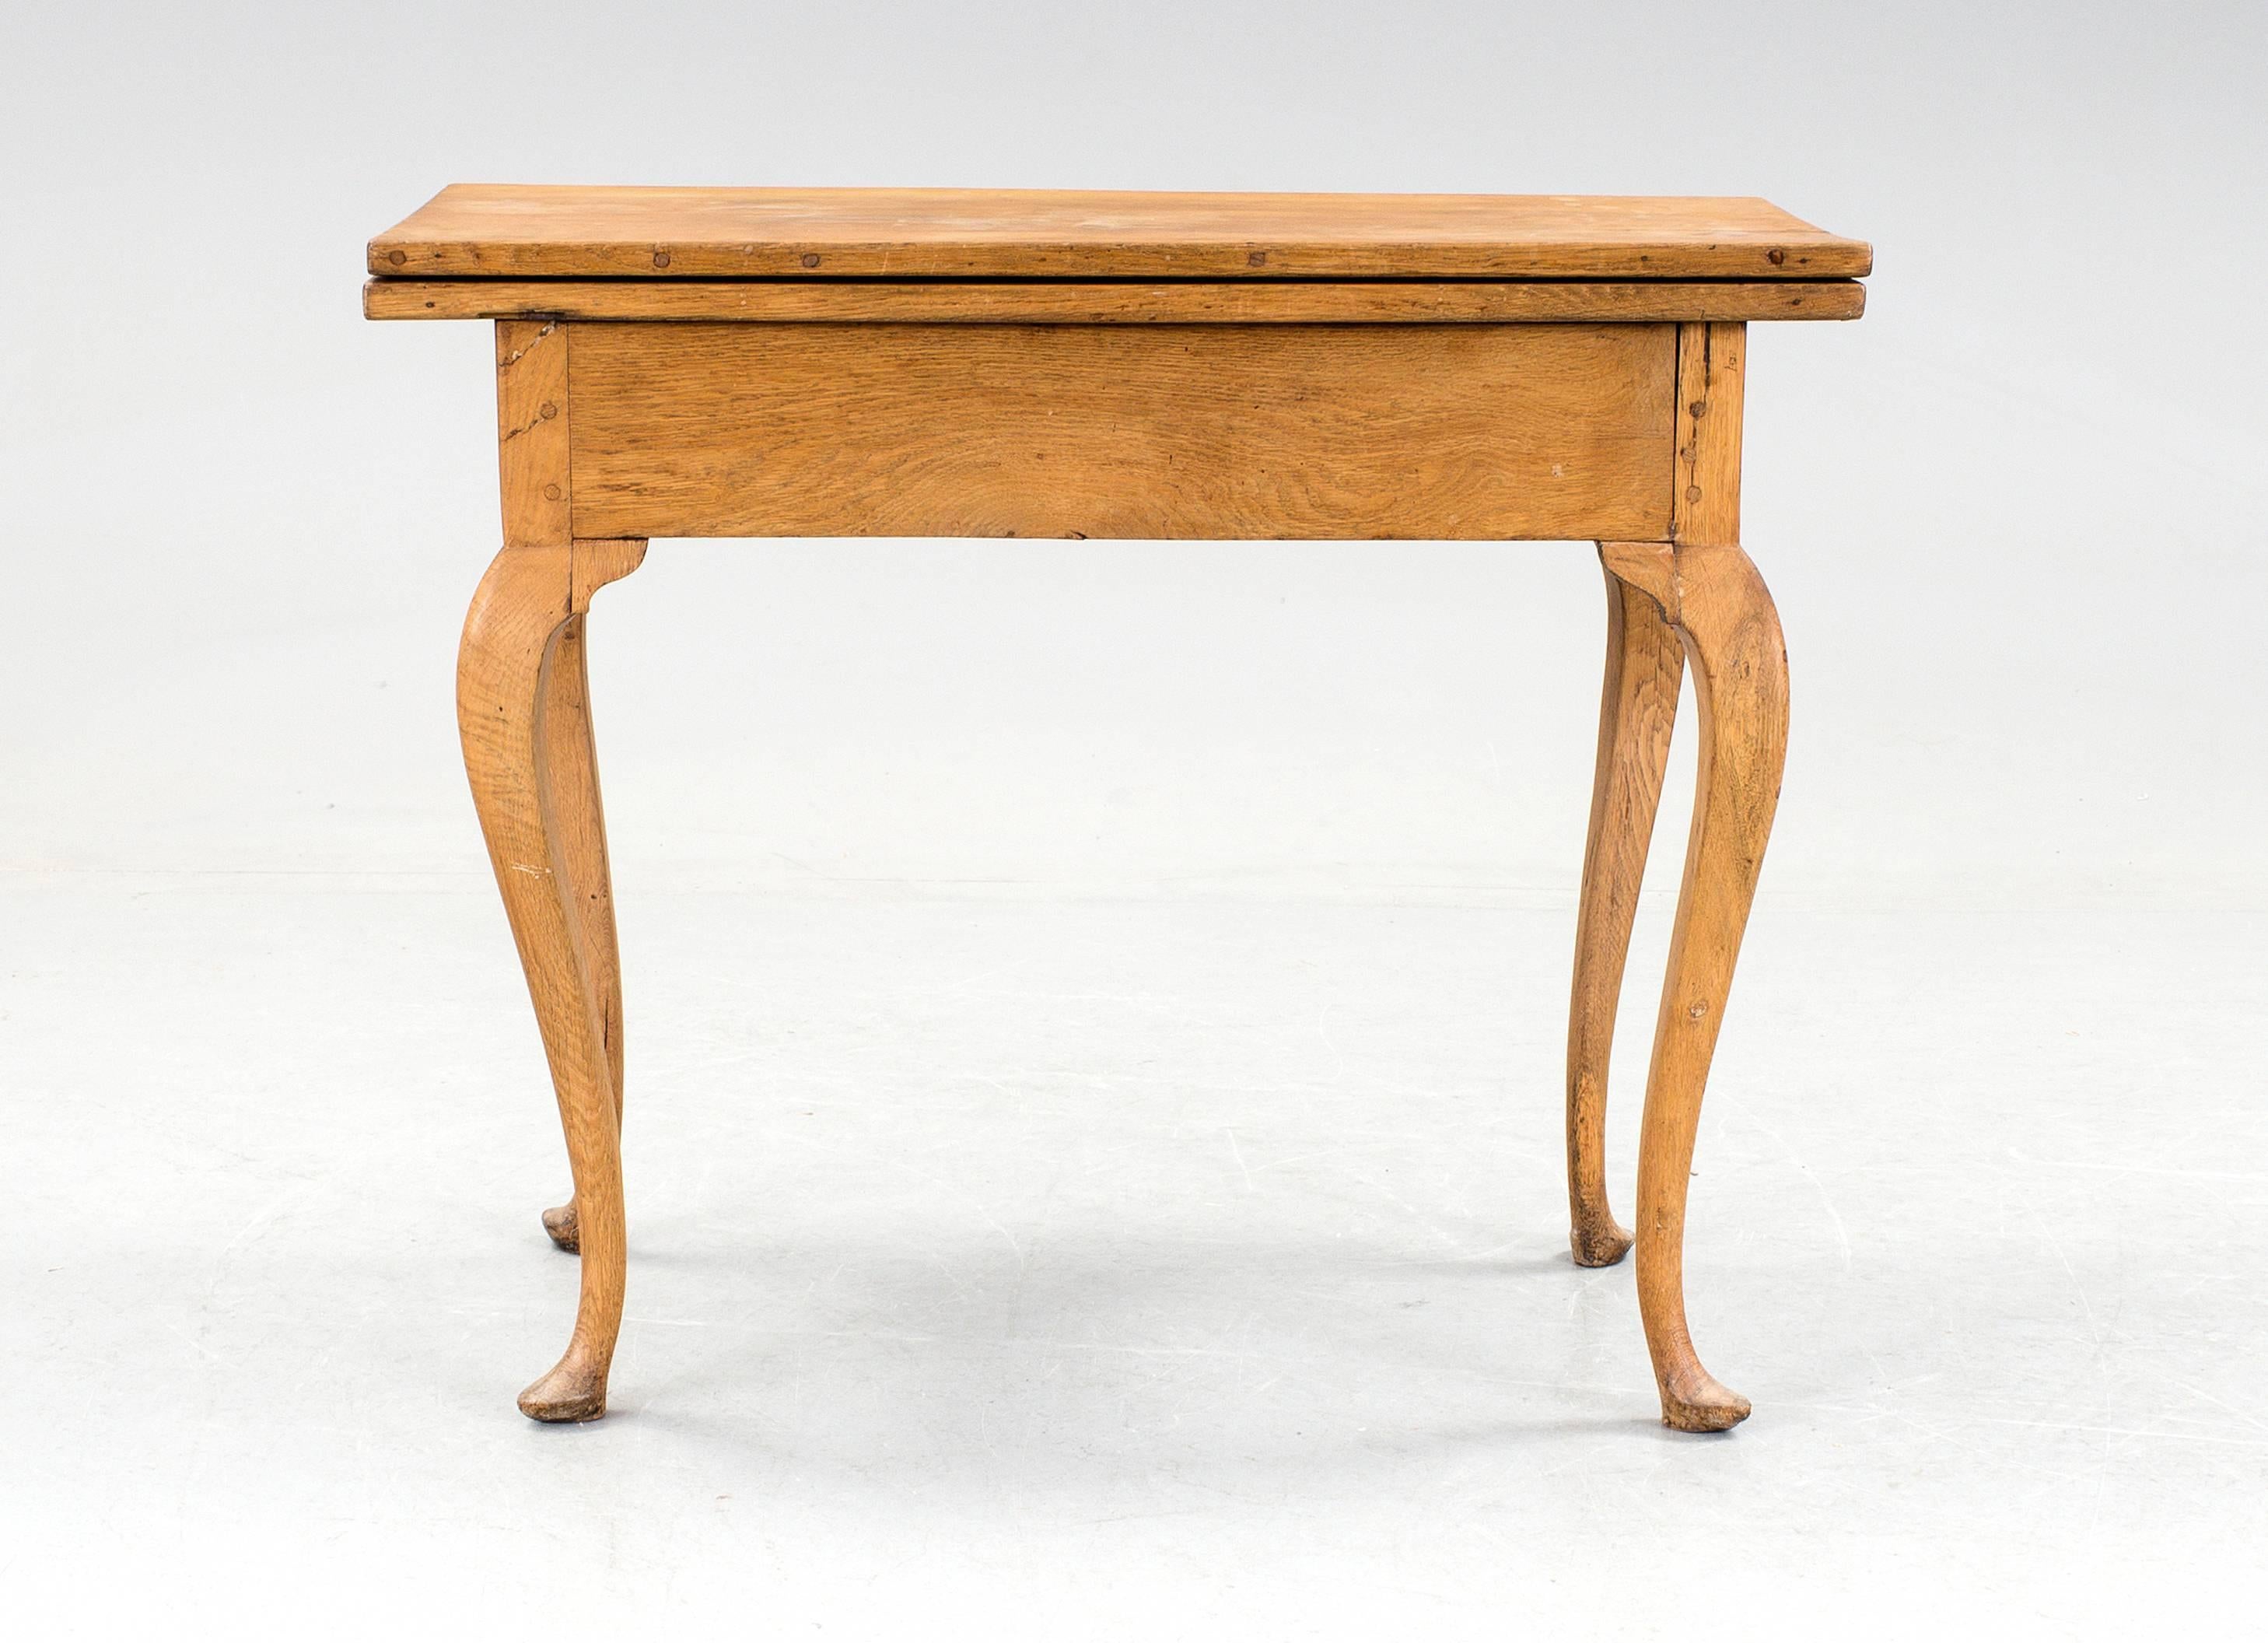 18th century Swedish Rococo game table with folding top, made in oakwood.